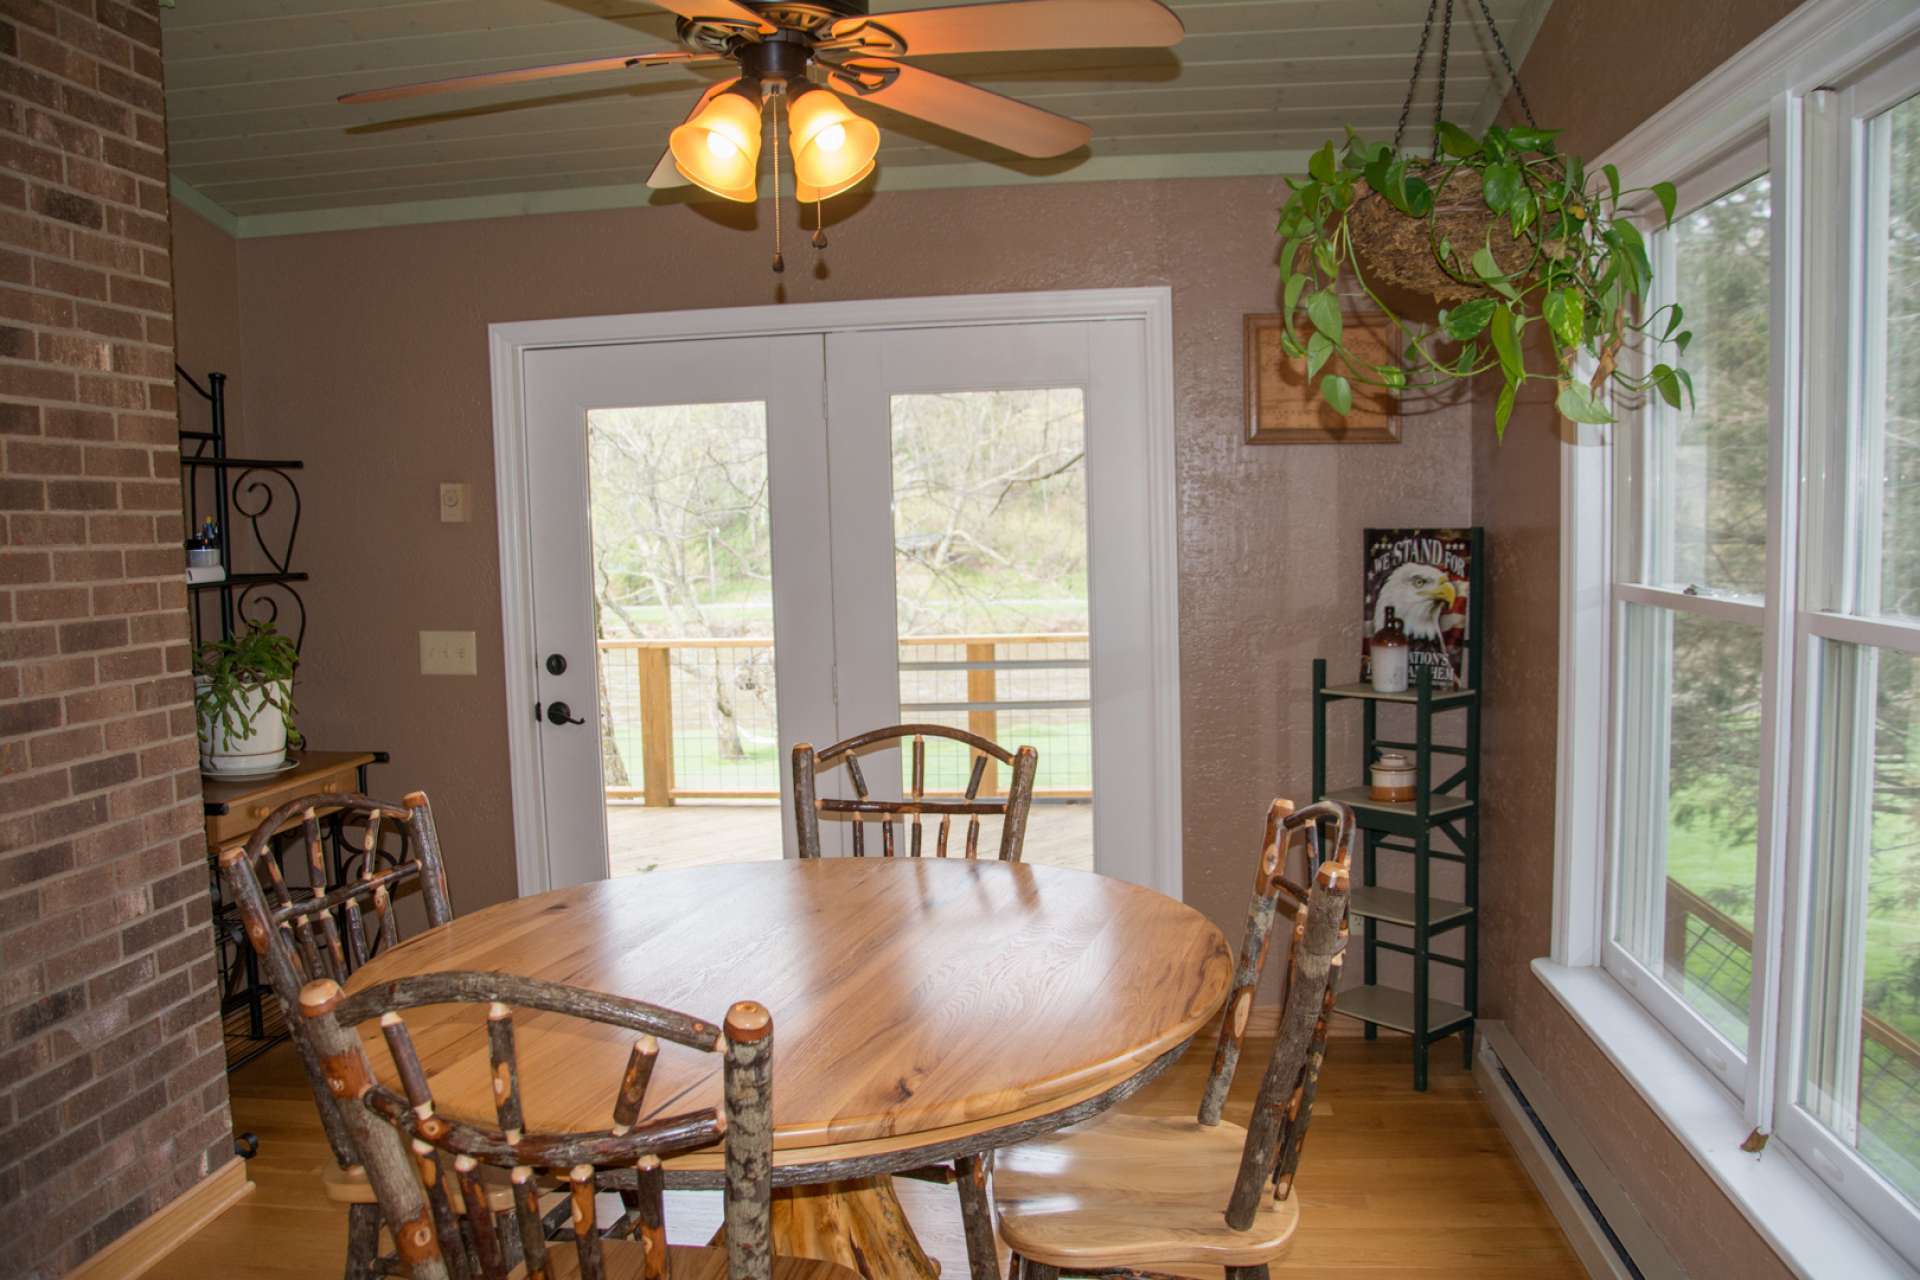 The dining area takes advantage of the outdoor scenery when dining inside and also offers easy access to the open back deck.